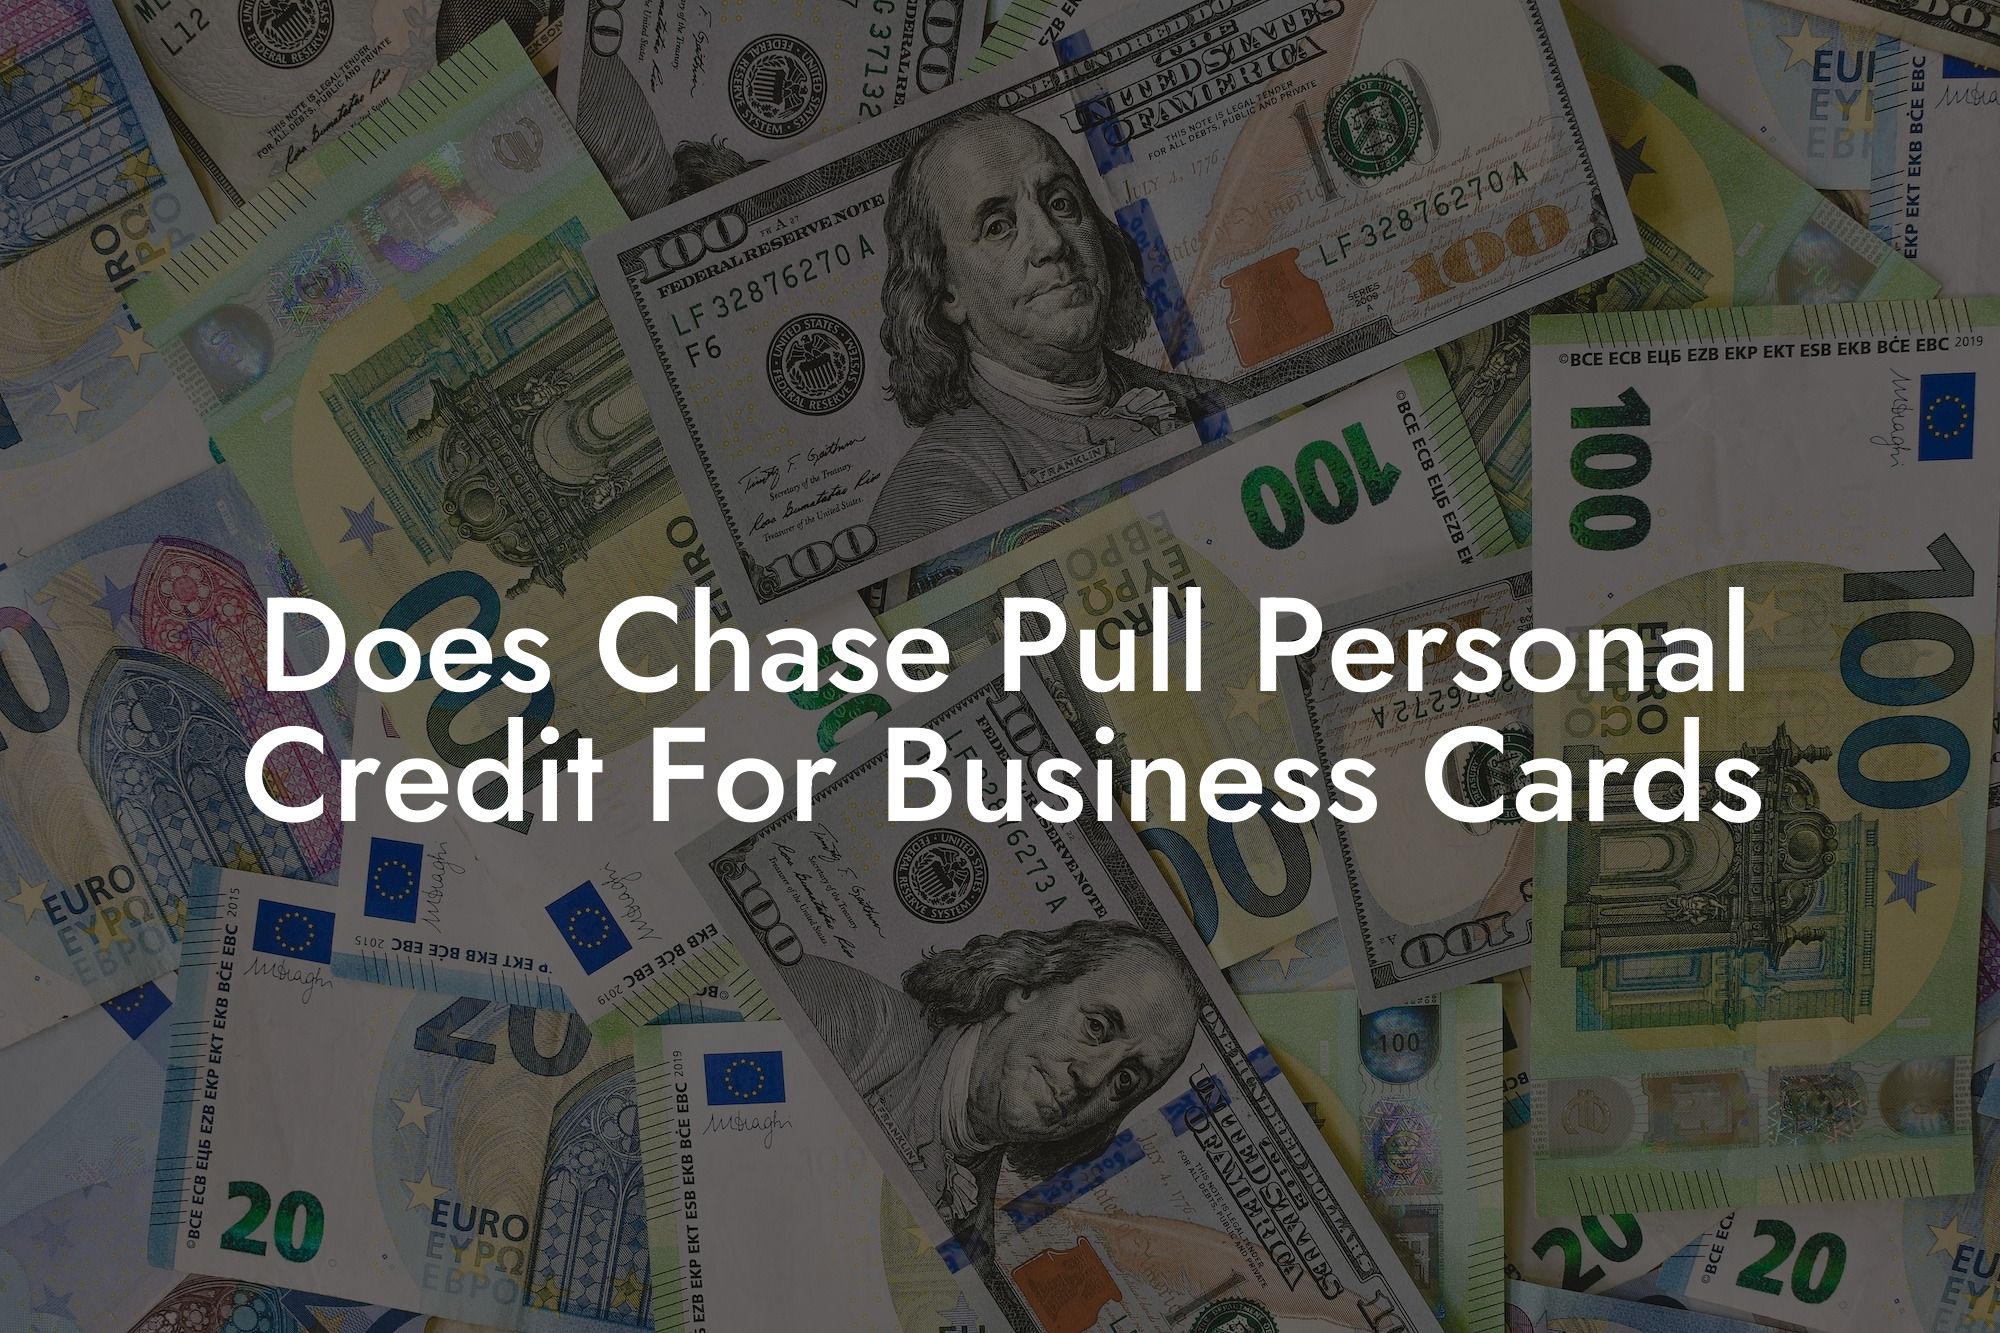 Does Chase Pull Personal Credit For Business Cards